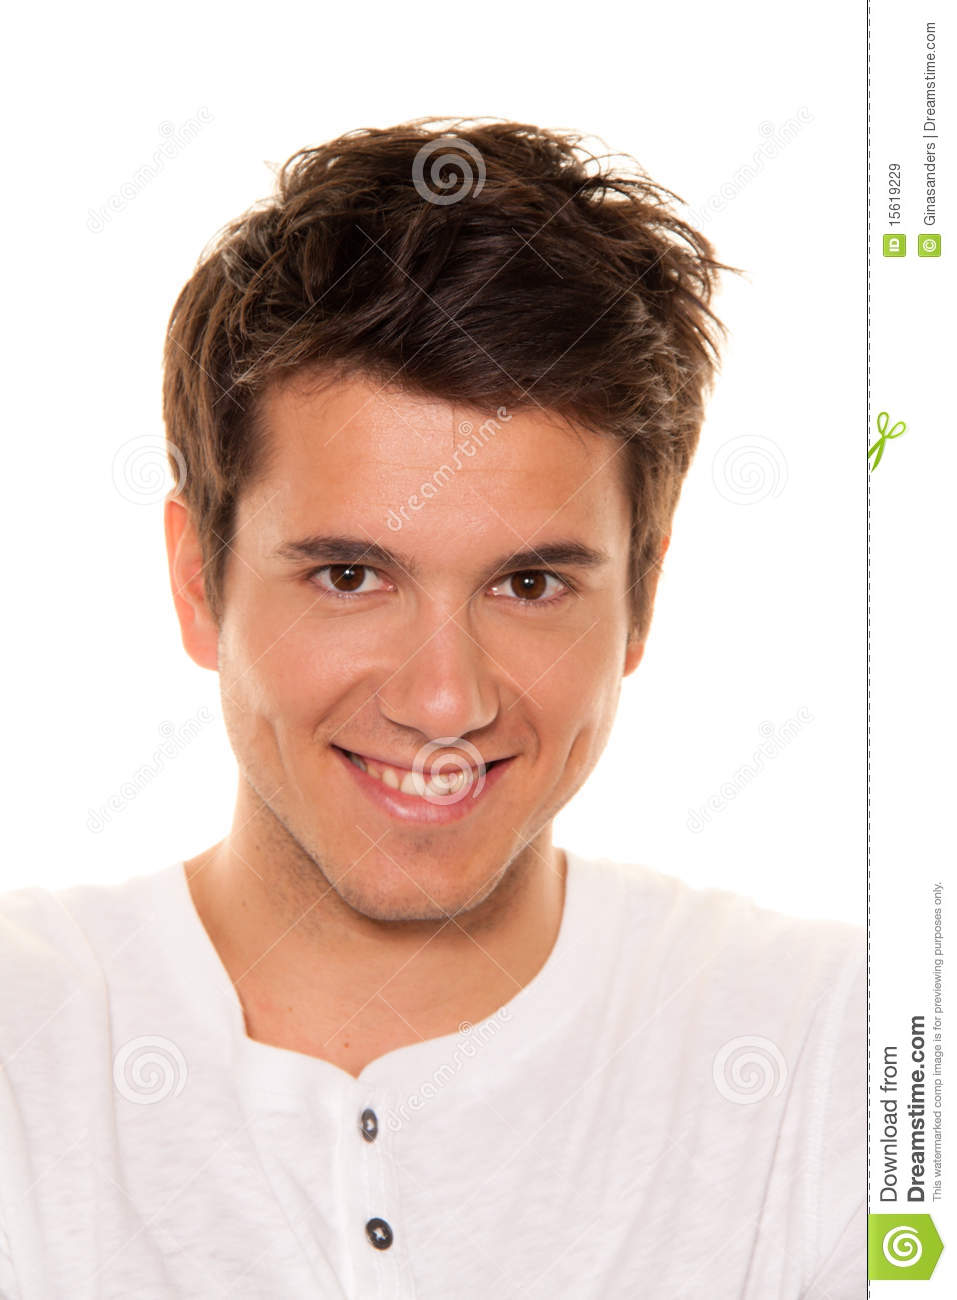 Young Nice Man Friendly Smile  Portrait Royalty Free Stock Images    